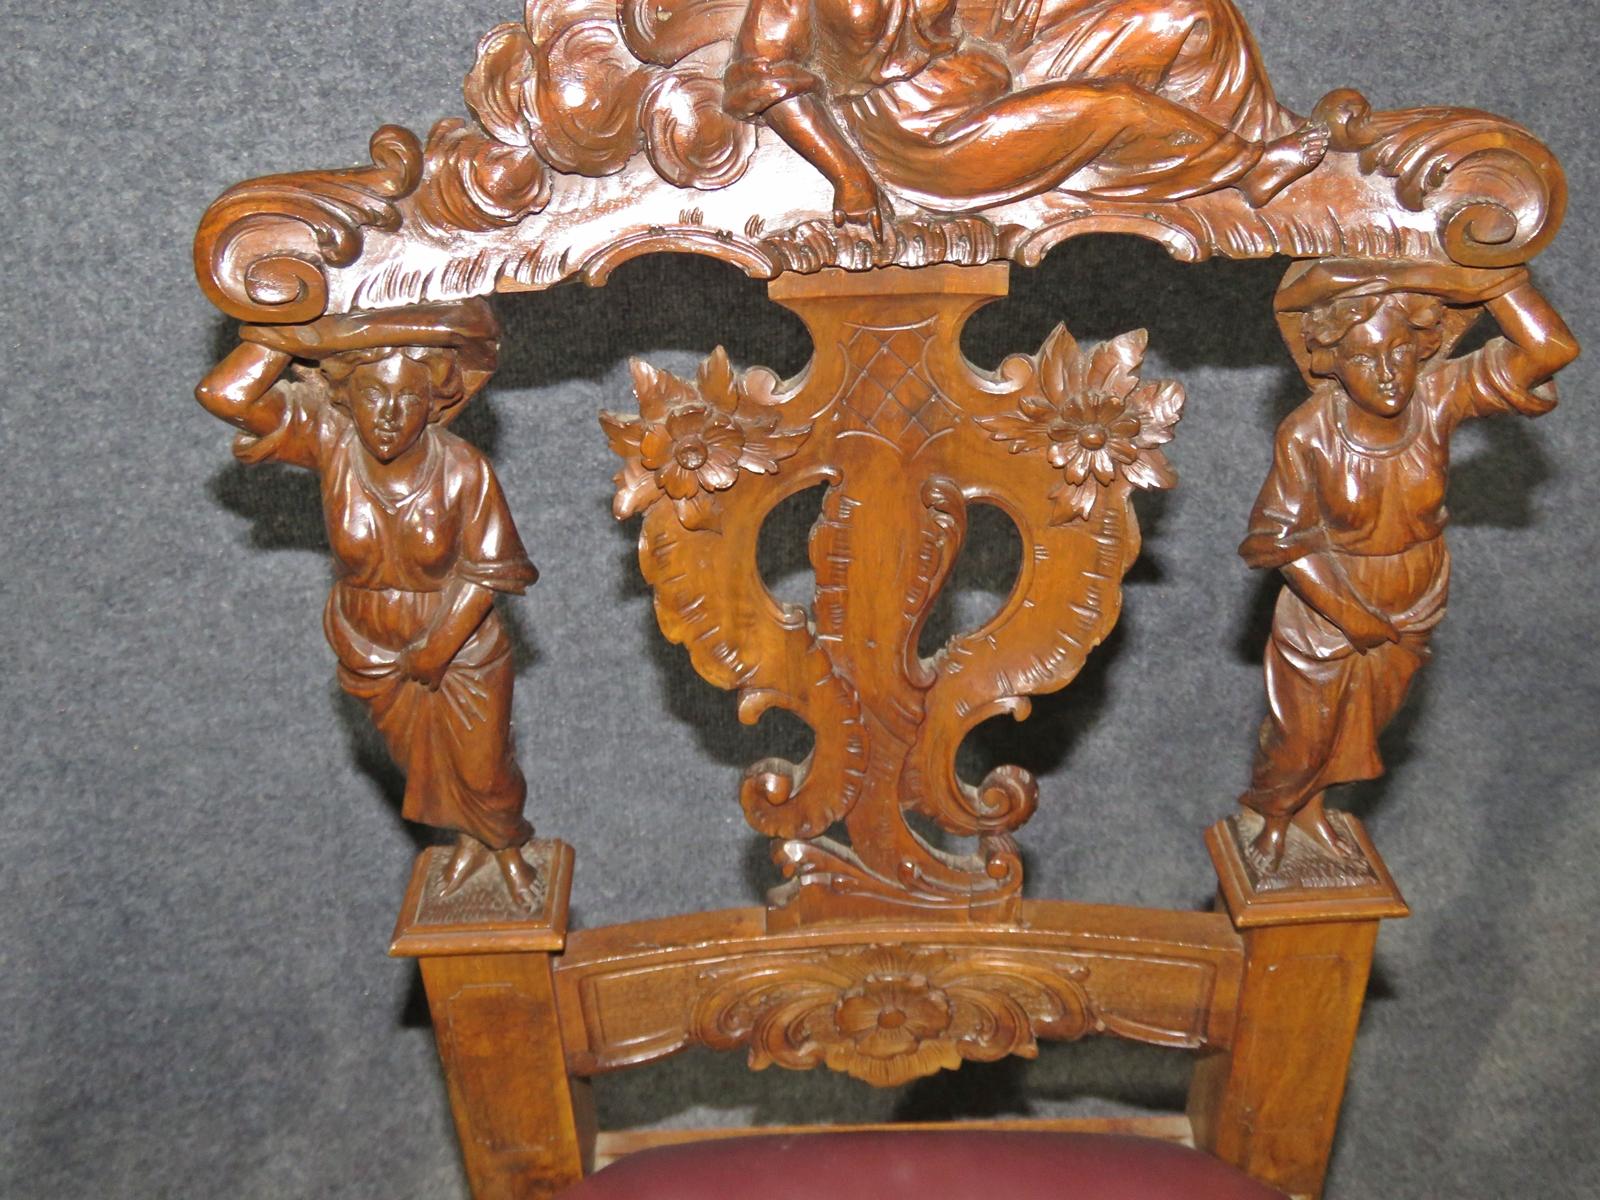 Pair of Figural Carved Walnut R.J. Horner Style Renaissance Chairs, circa 1880 In Good Condition For Sale In Swedesboro, NJ